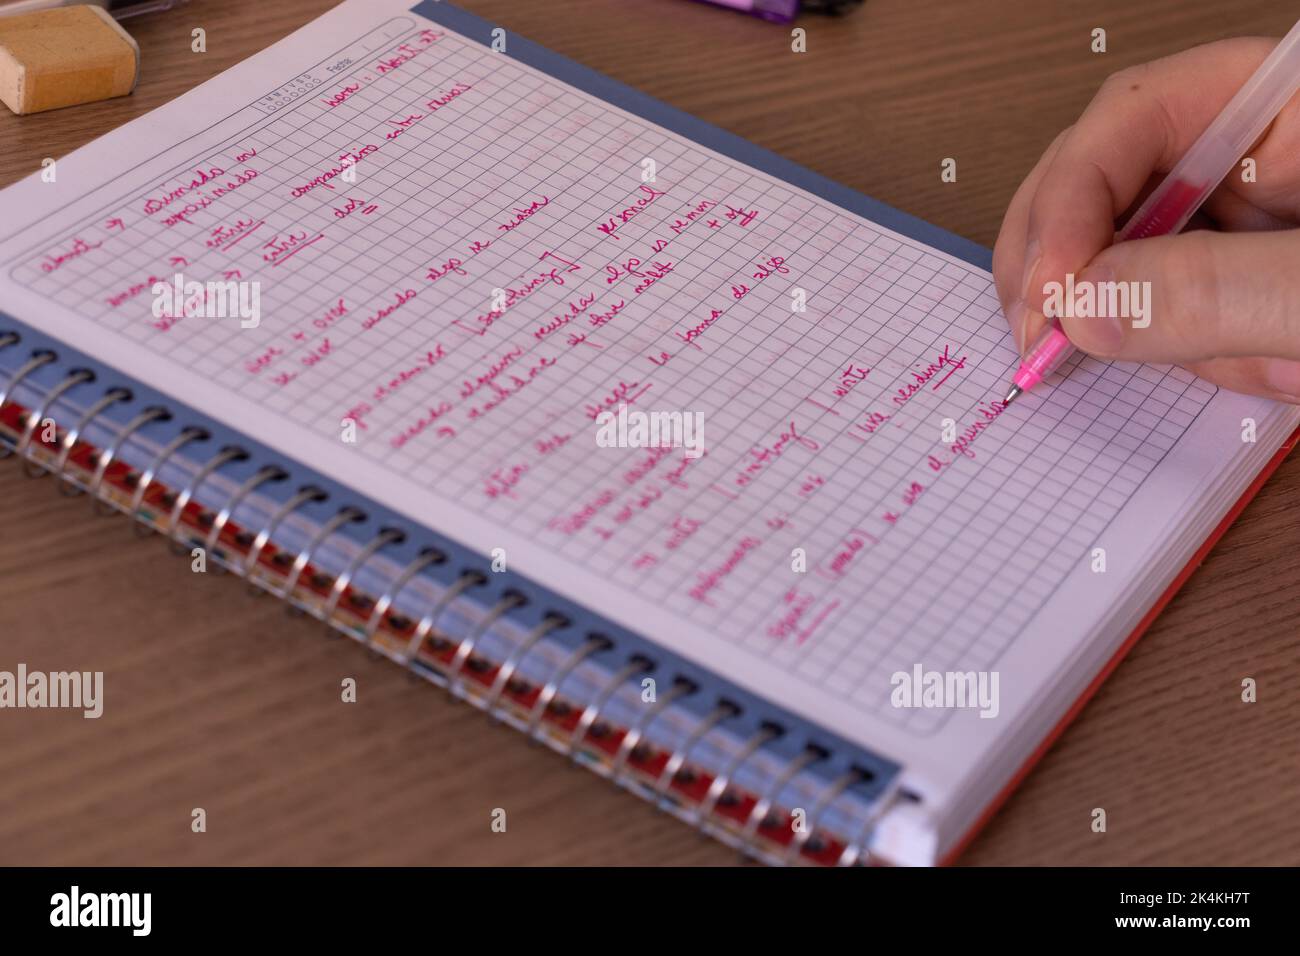 Man doing English homework on a notebook writing with a pen Stock Photo